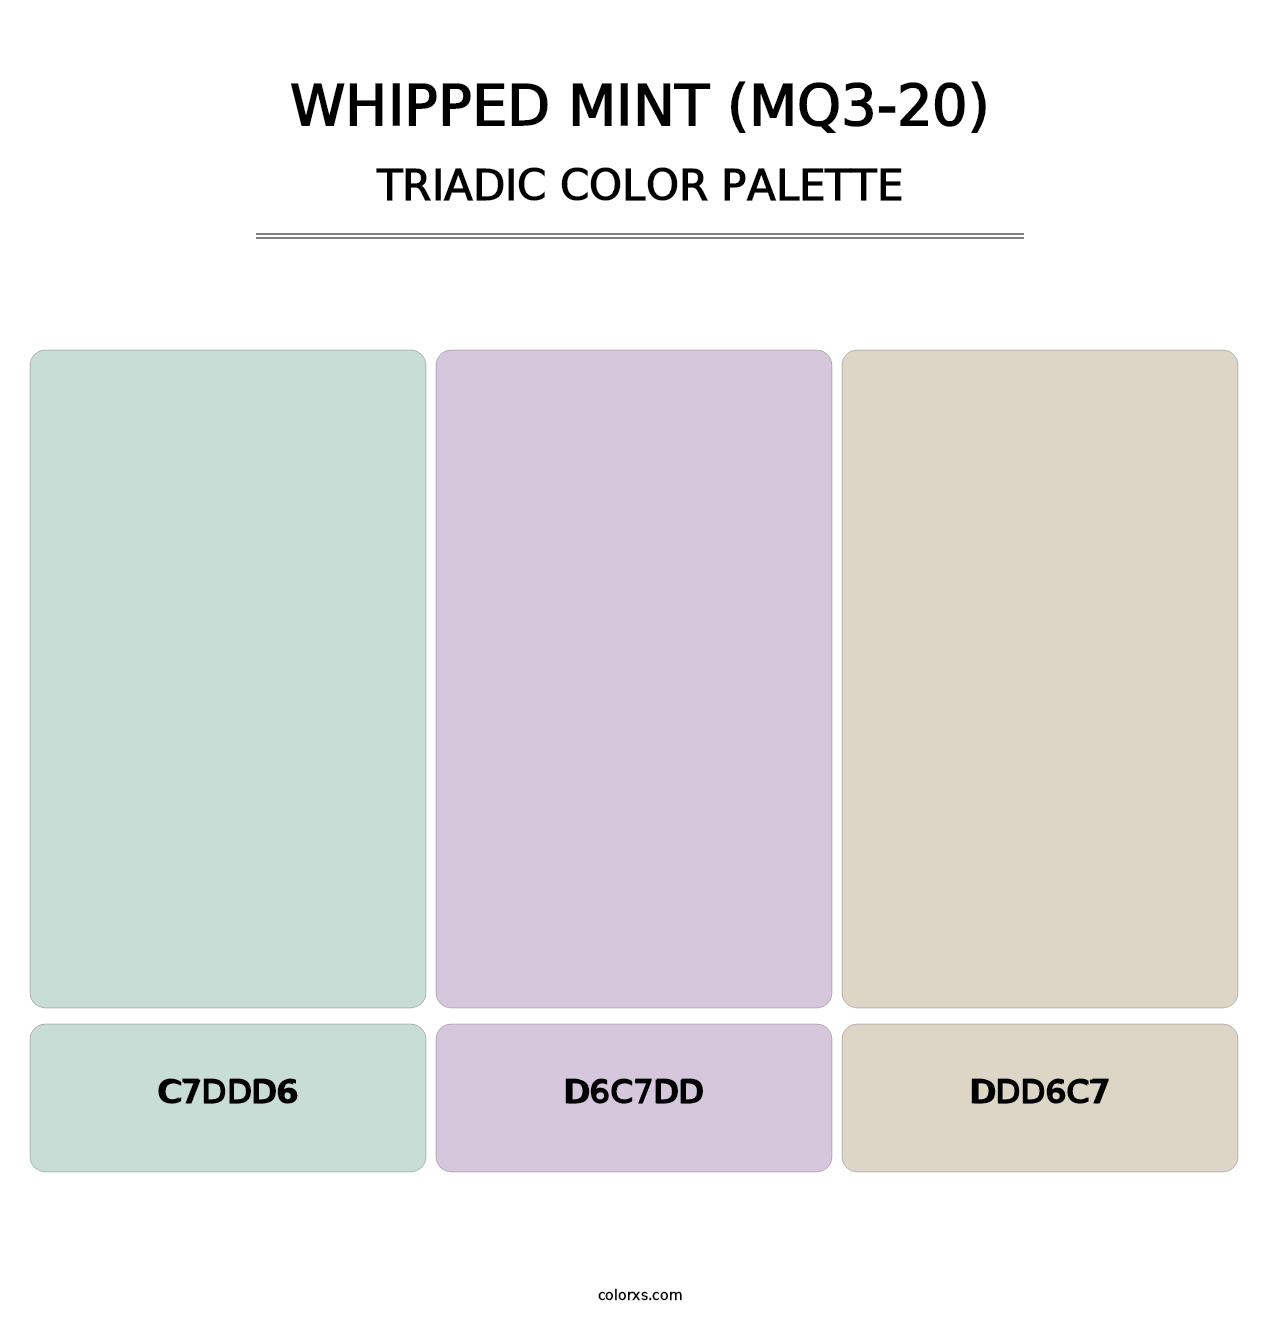 Whipped Mint (MQ3-20) - Triadic Color Palette